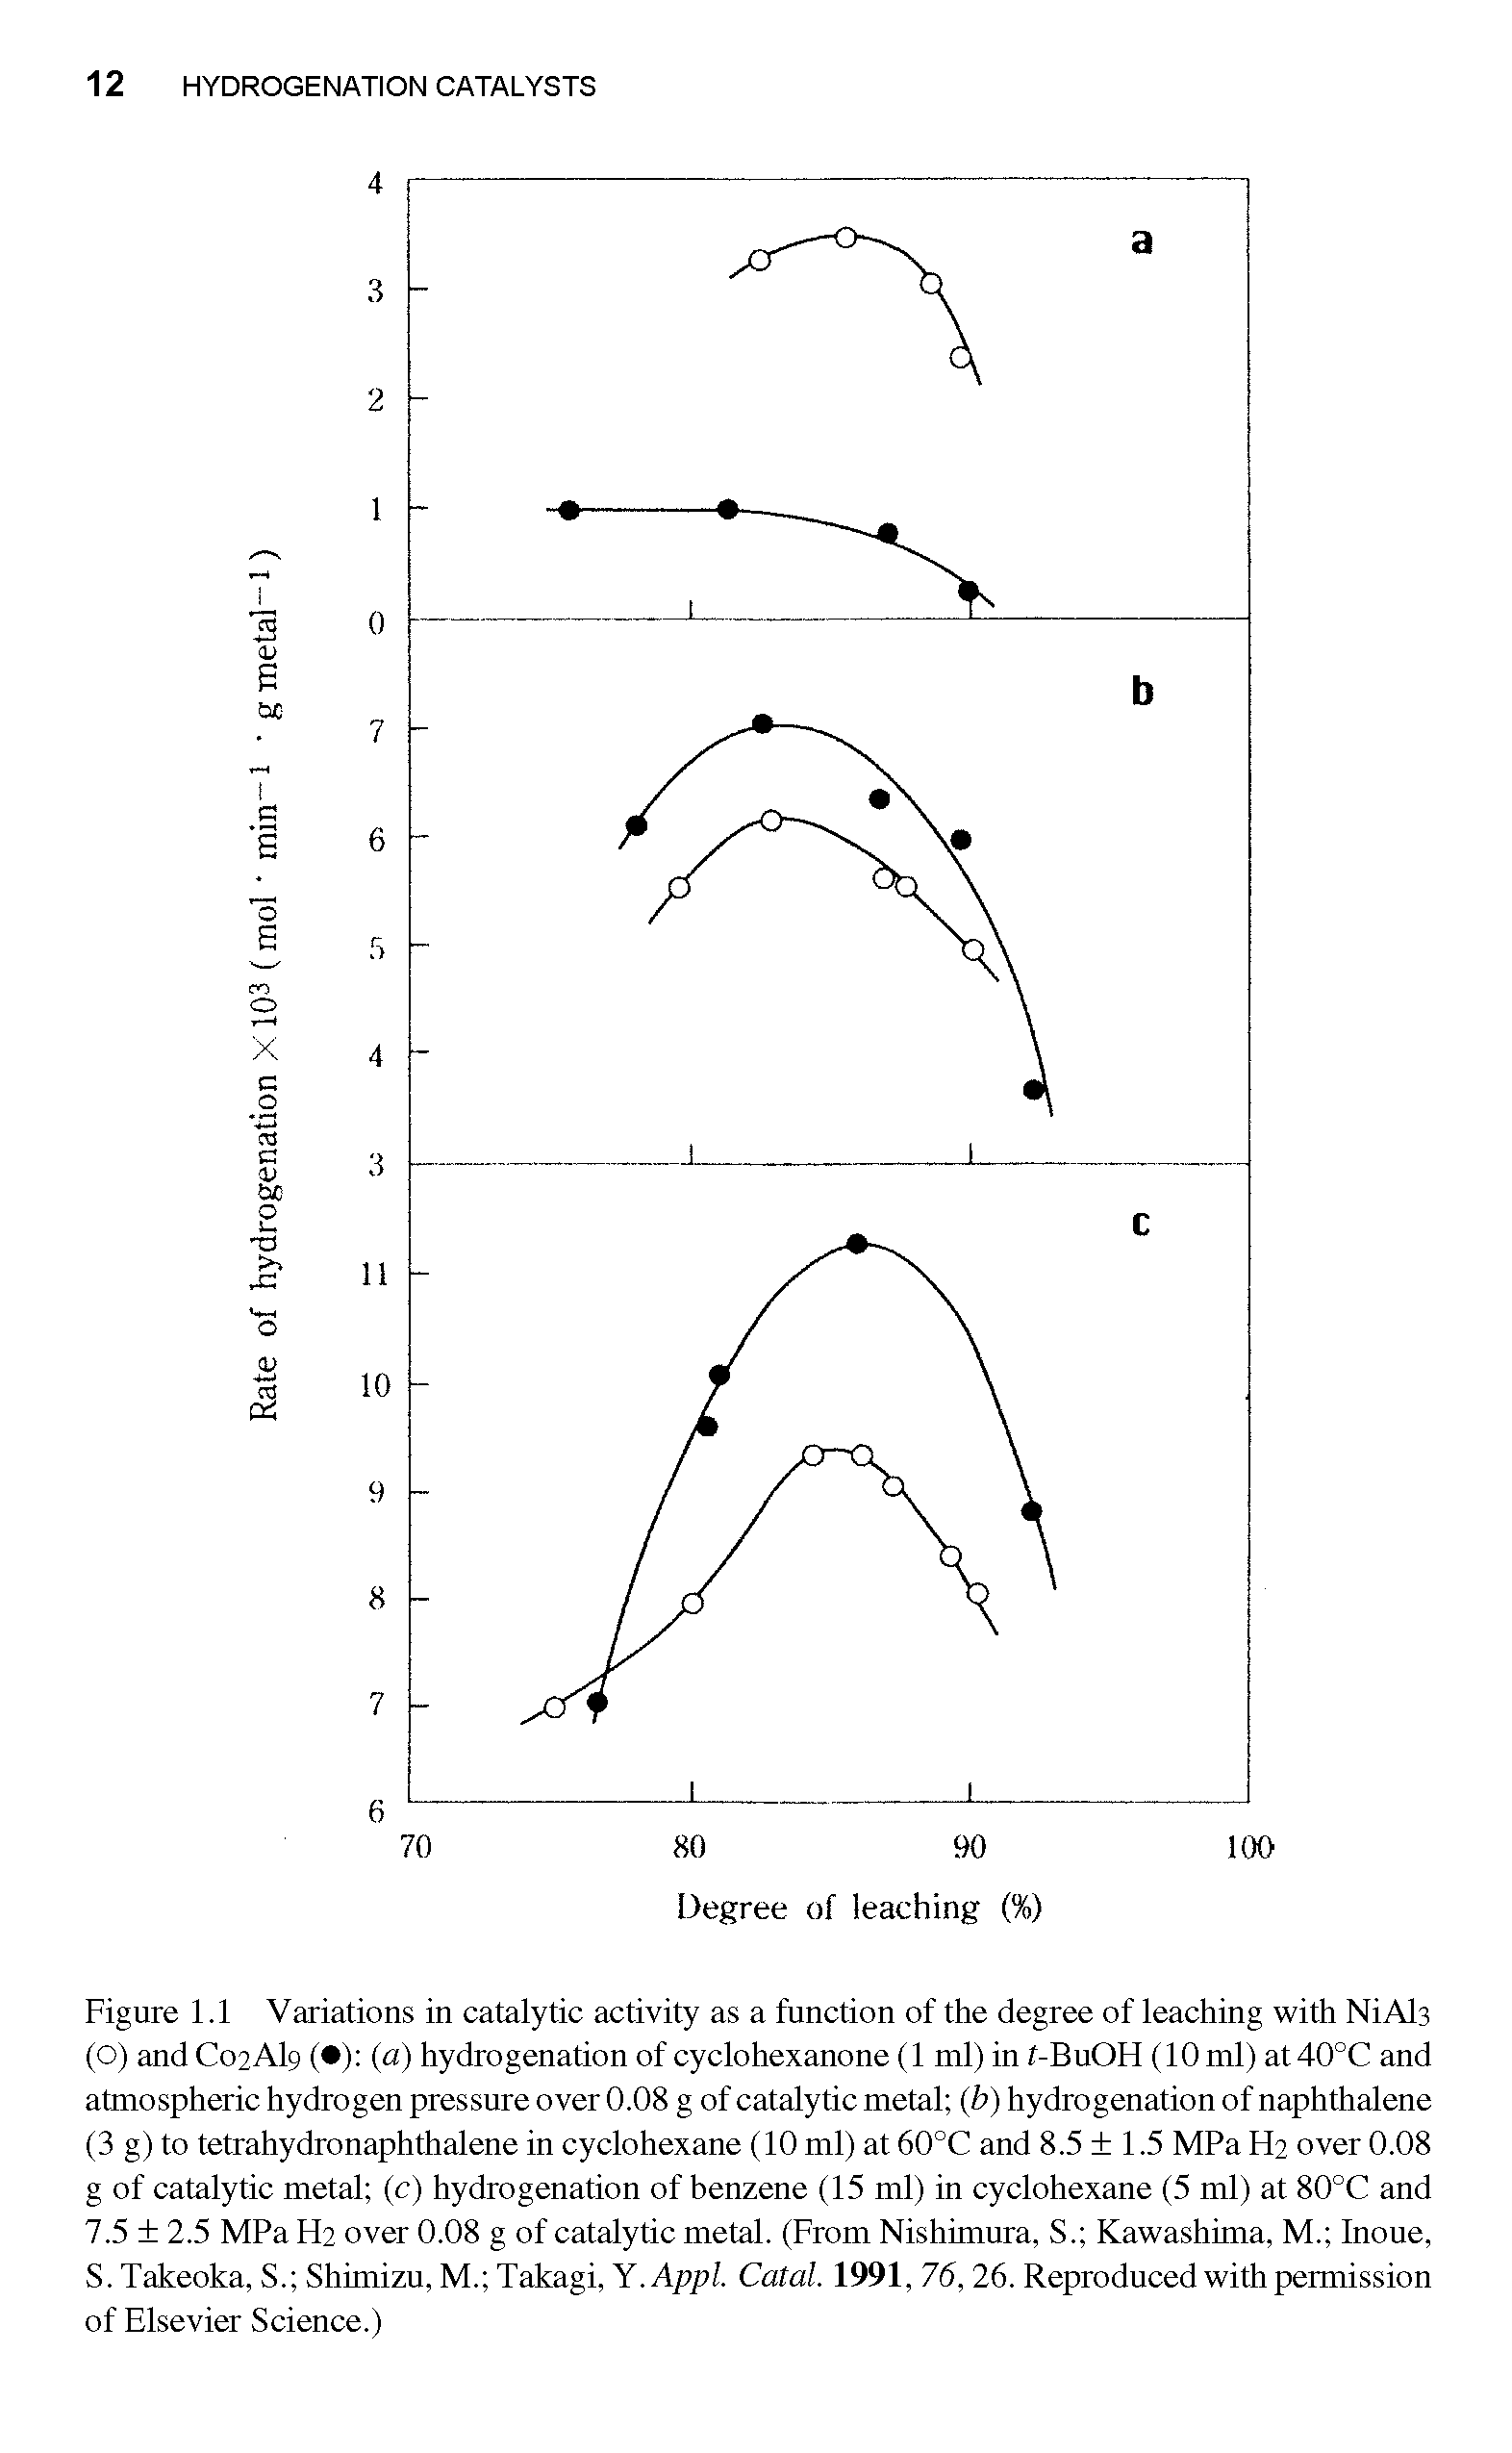 Figure 1.1 Variations in catalytic activity as a function of the degree of leaching with NiAb (O) and C02AI9 ( ) (a) hydrogenation of cyclohexanone (1 ml) in f-BuOH (10 ml) at40°C and atmospheric hydrogen pressure over 0.08 g of catalytic metal (b) hydrogenation of naphthalene (3 g) to tetrahydronaphthalene in cyclohexane (10 ml) at 60°C and 8.5 1.5 MPa H2 over 0.08 g of catalytic metal (c) hydrogenation of benzene (15 ml) in cyclohexane (5 ml) at 80°C and 7.5 2.5 MPa H2 over 0.08 g of catalytic metal. (From Nishimura, S. Kawashima, M. Inoue, S. Takeoka, S. Shimizu, M. Takagi, Y.Appl. Catal. 1991, 76, 26. Reproduced with permission of Elsevier Science.)...